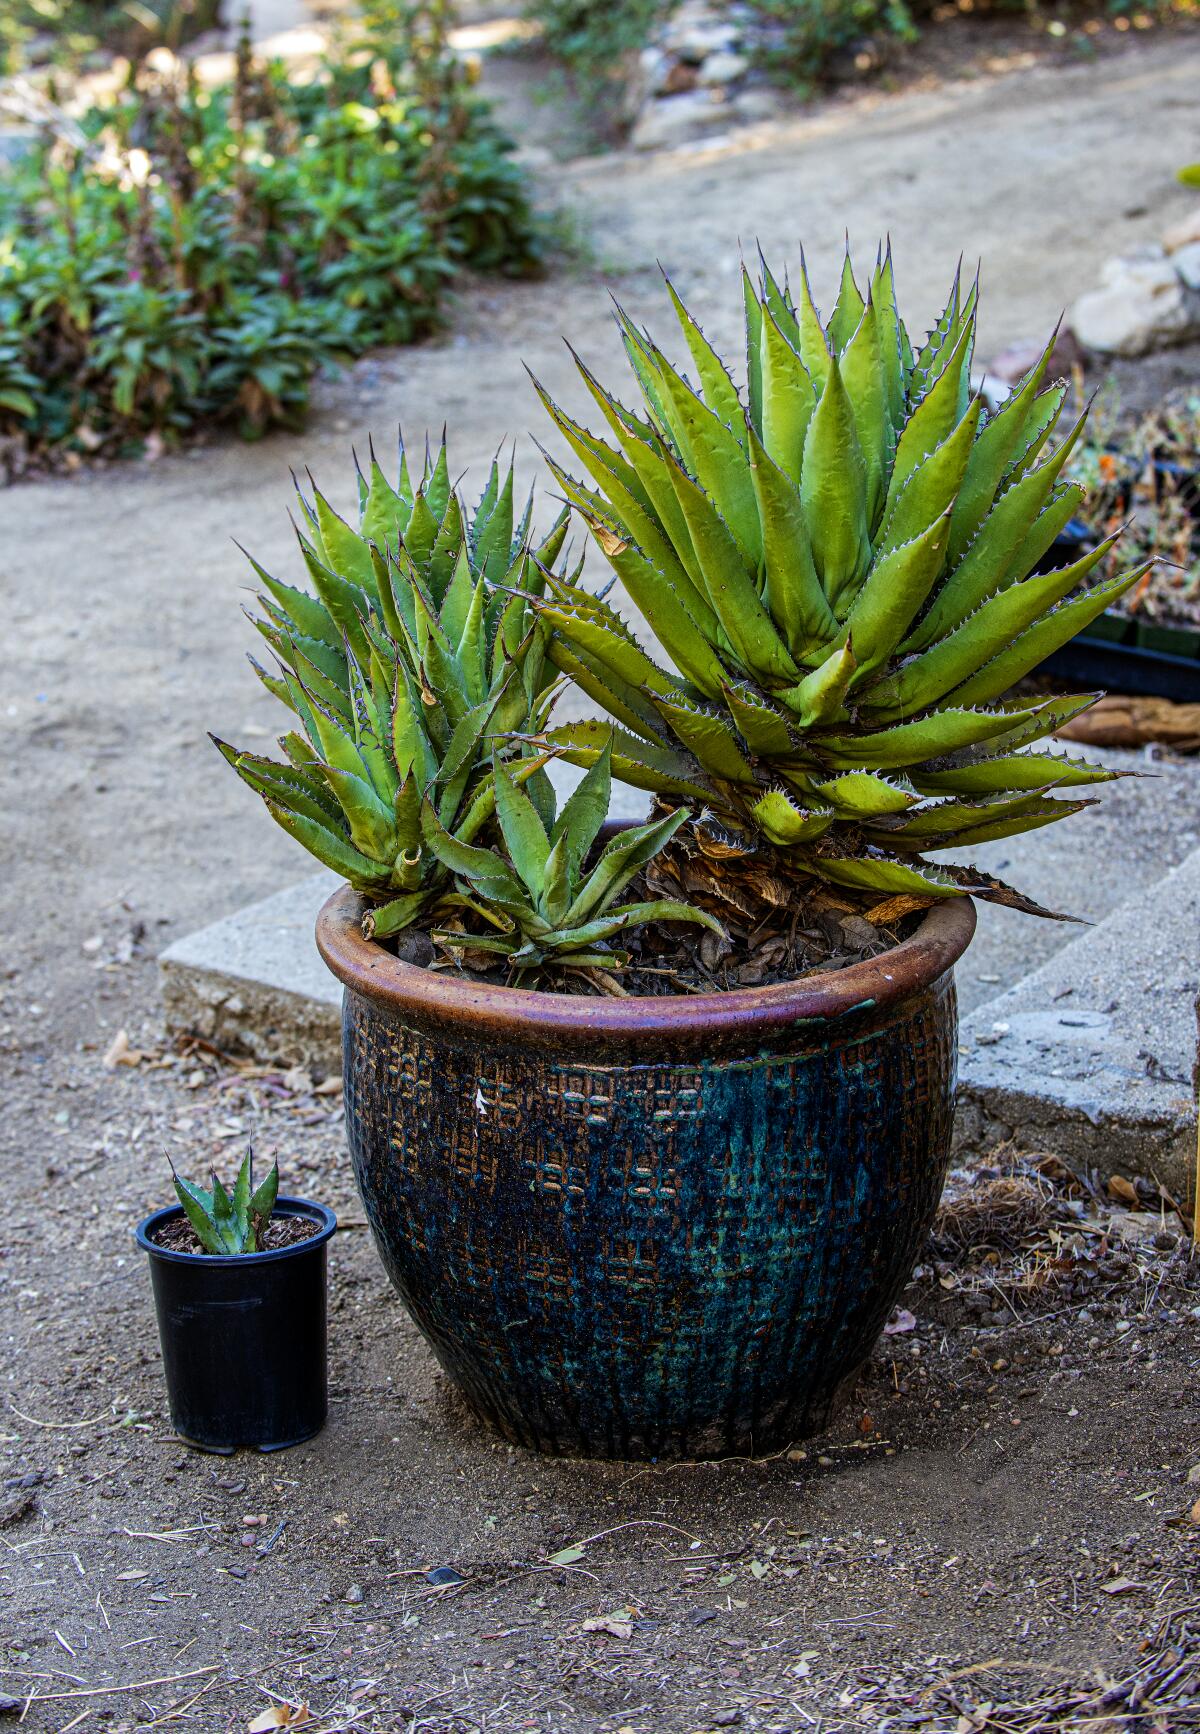 Shaw's agave 